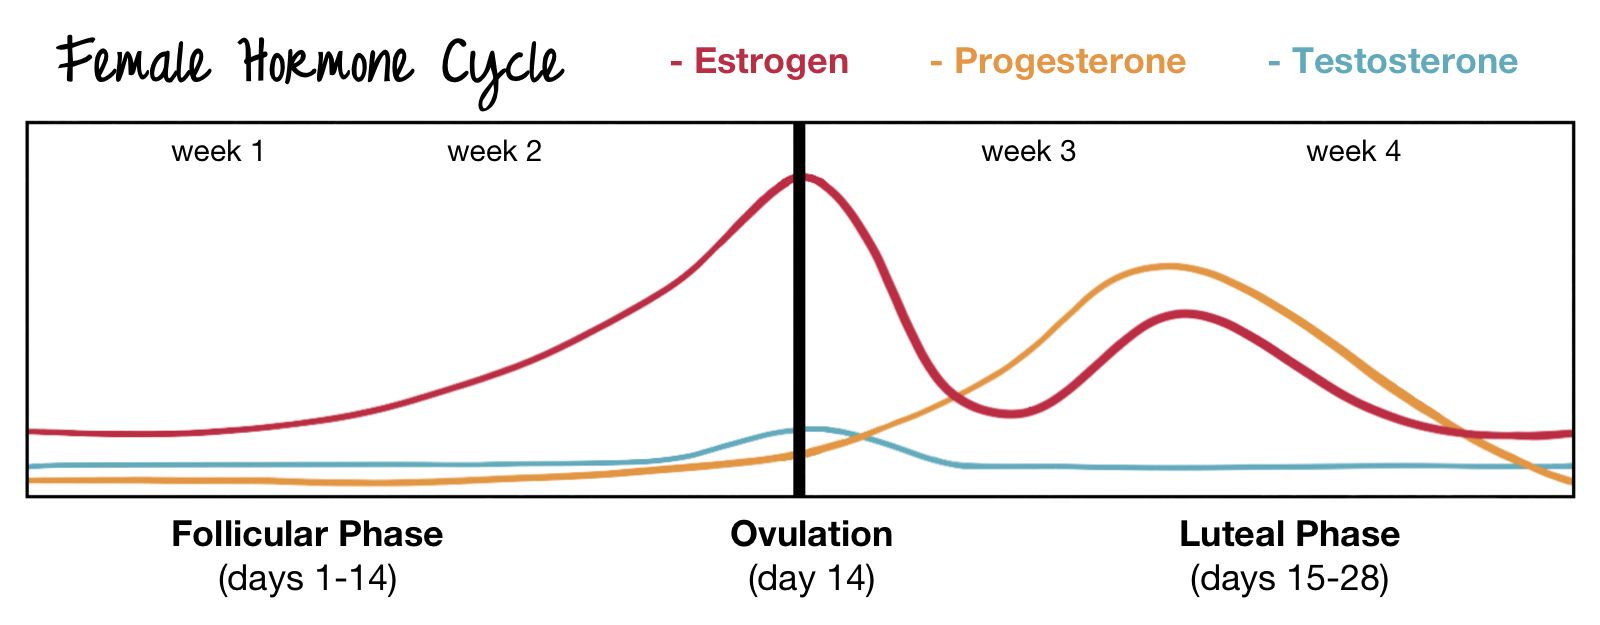 graph of the female hormone cycle, with colored lines denoting the rise and fall of estrogen, progesterone, and testosterone throughout the follicular phase, ovulation, and luteal phase